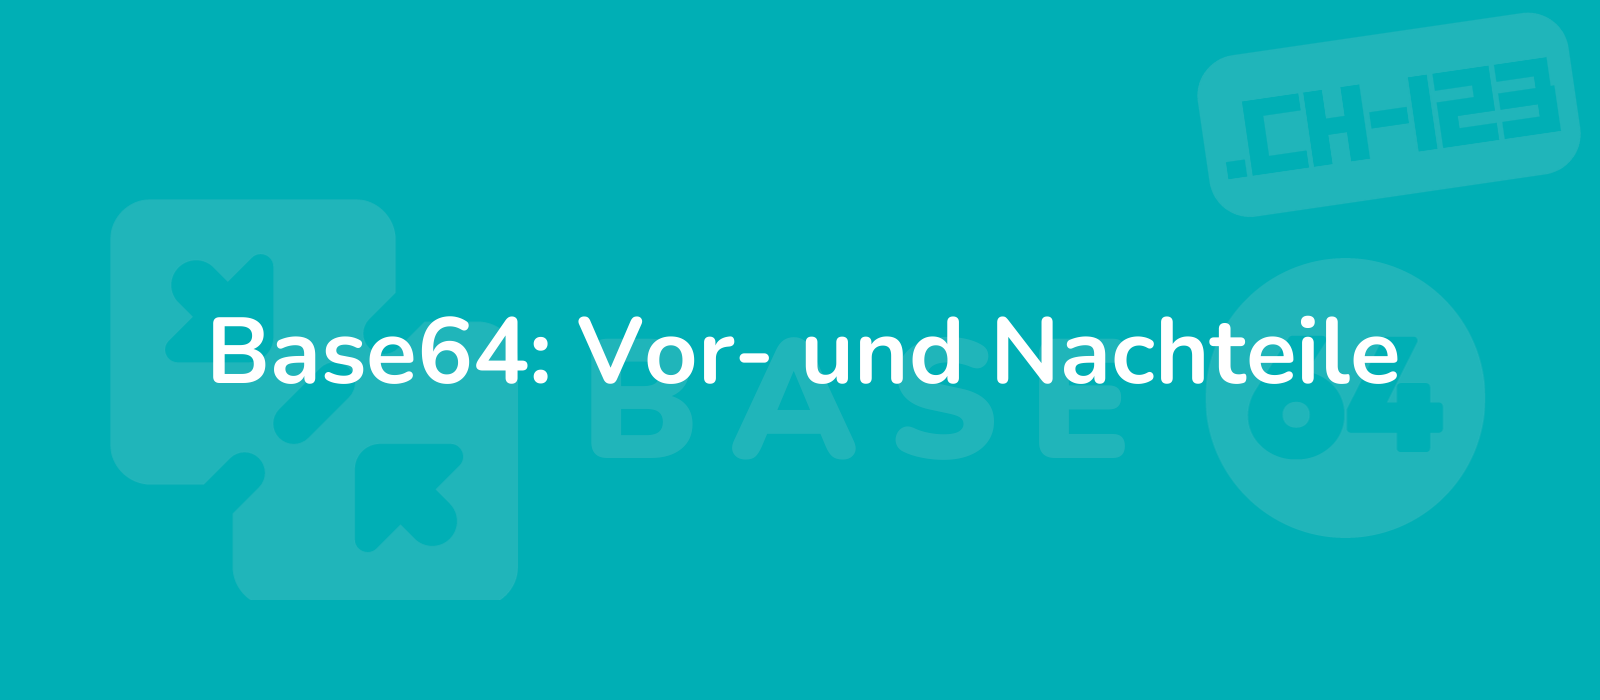 modern image depicting the pros and cons of base64 in a sleek minimalist design with a mix of vibrant colors 8k resolution